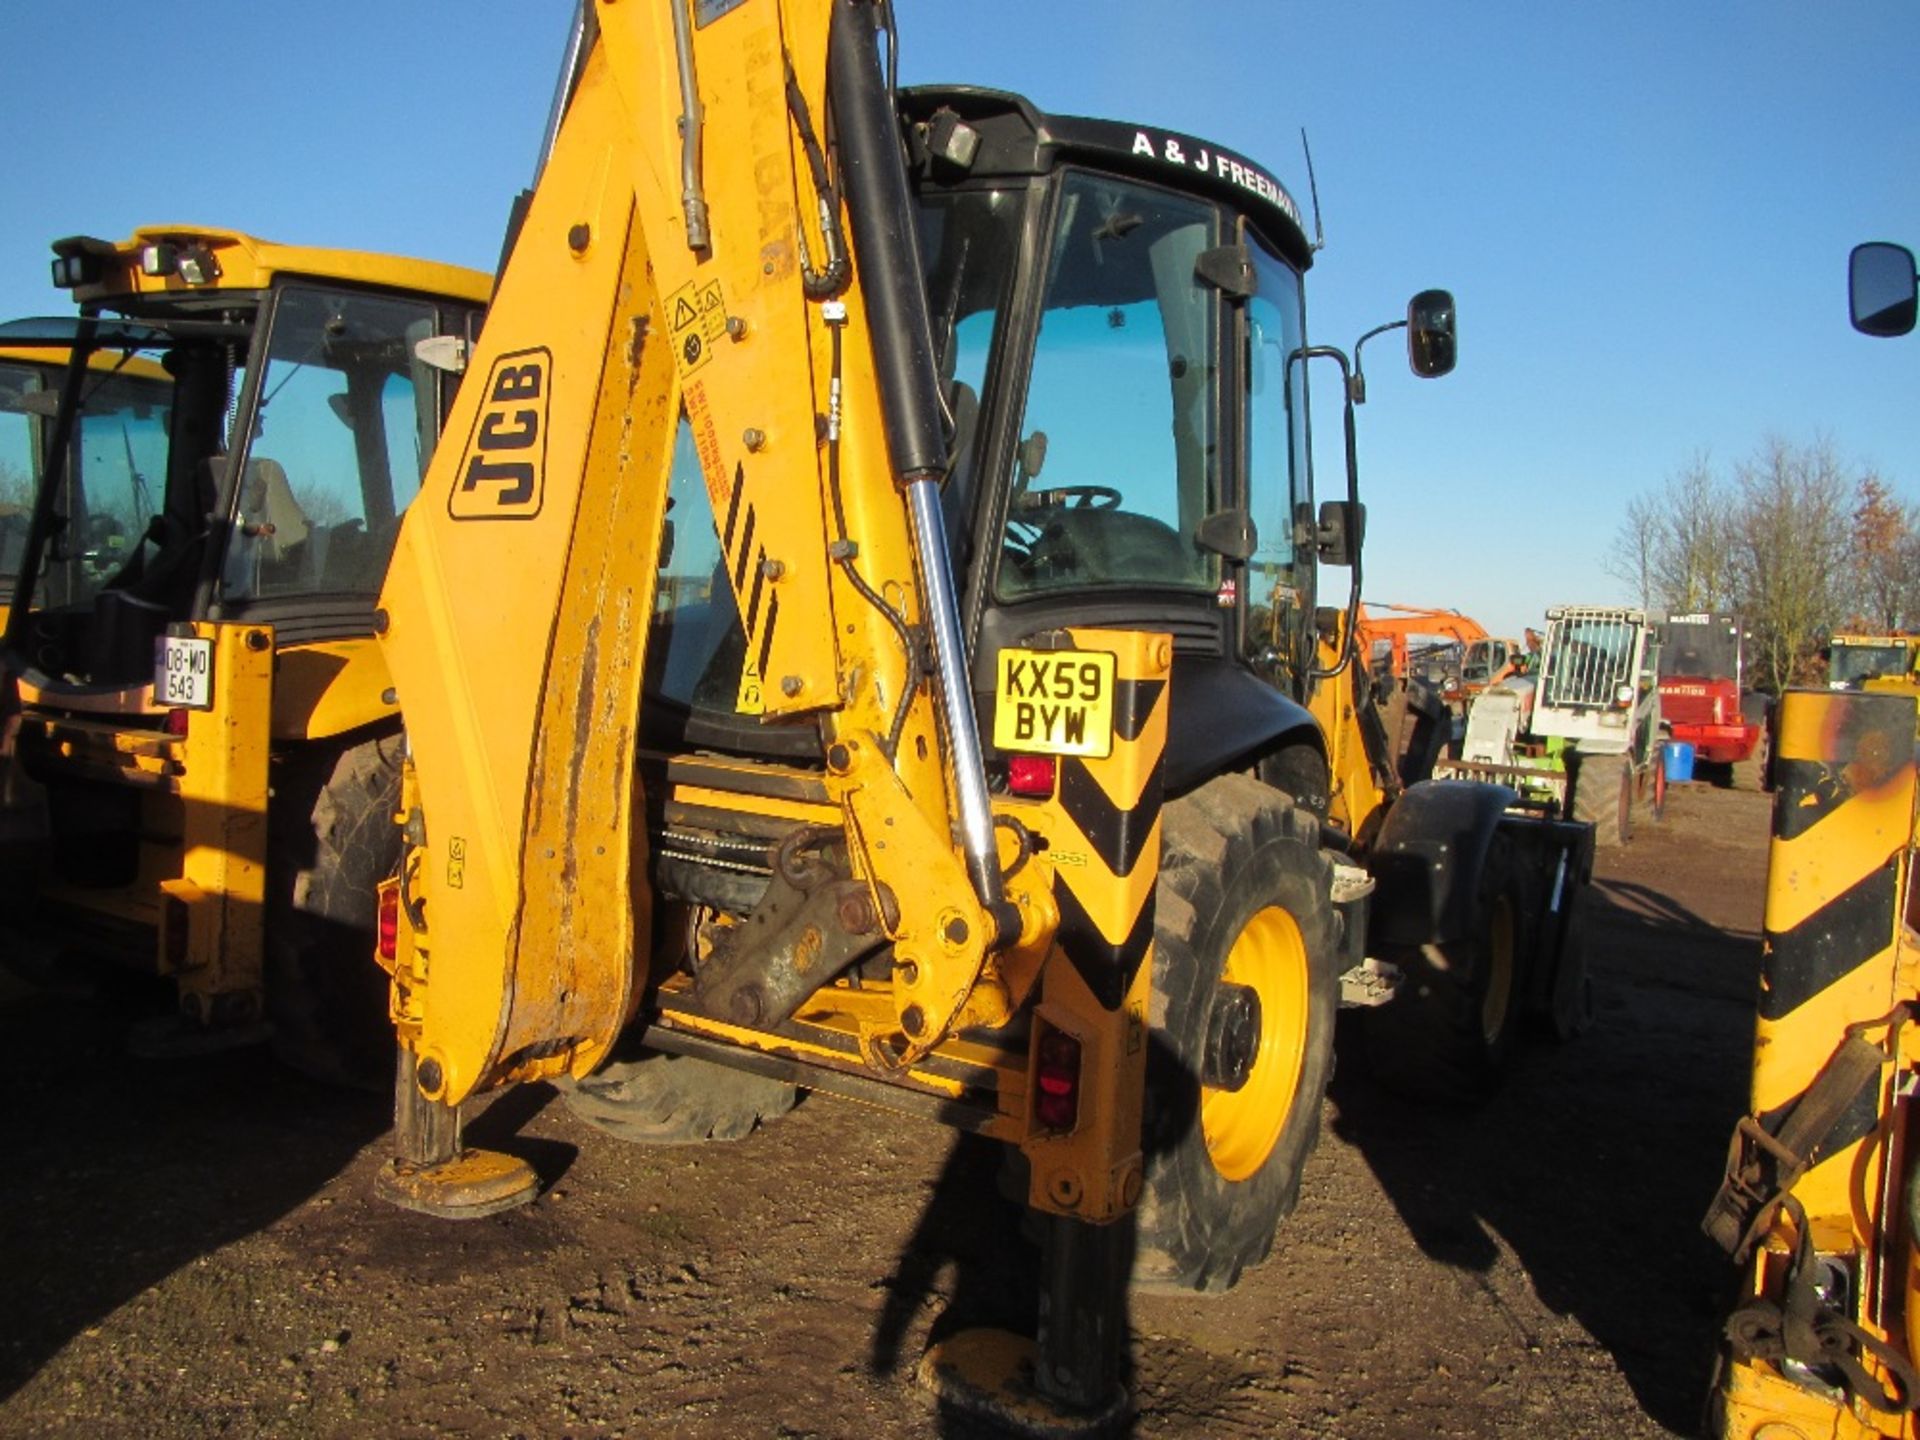 2009 JCB 3CX Wheeled Contractor Digger Loader c/w Air Con, Power Slide, Mobilizer Fitted. Reg Docs - Image 6 of 6